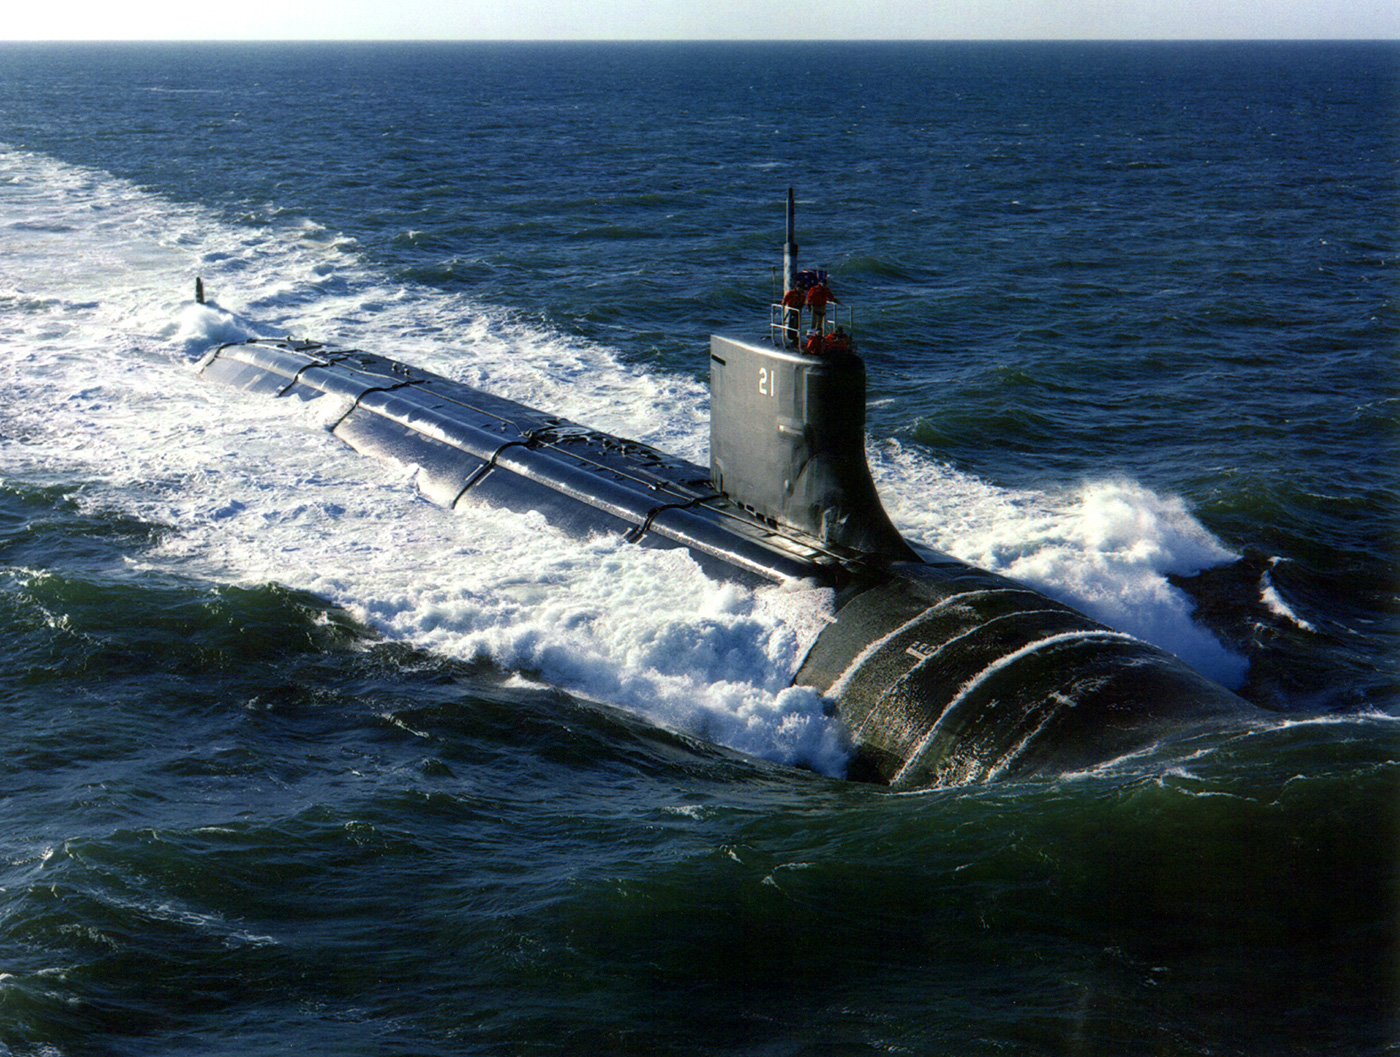 <p>USS Seawolf (SSN 21), USS Jimmy Carter (SSN 23)</p><p>USS Seawolf (SSN-21) commissioned in 1997. USS Jimmy Carter (SSN-23) has 100 ft. hull extension called &quot;Multi-mission Platform&quot;</p>